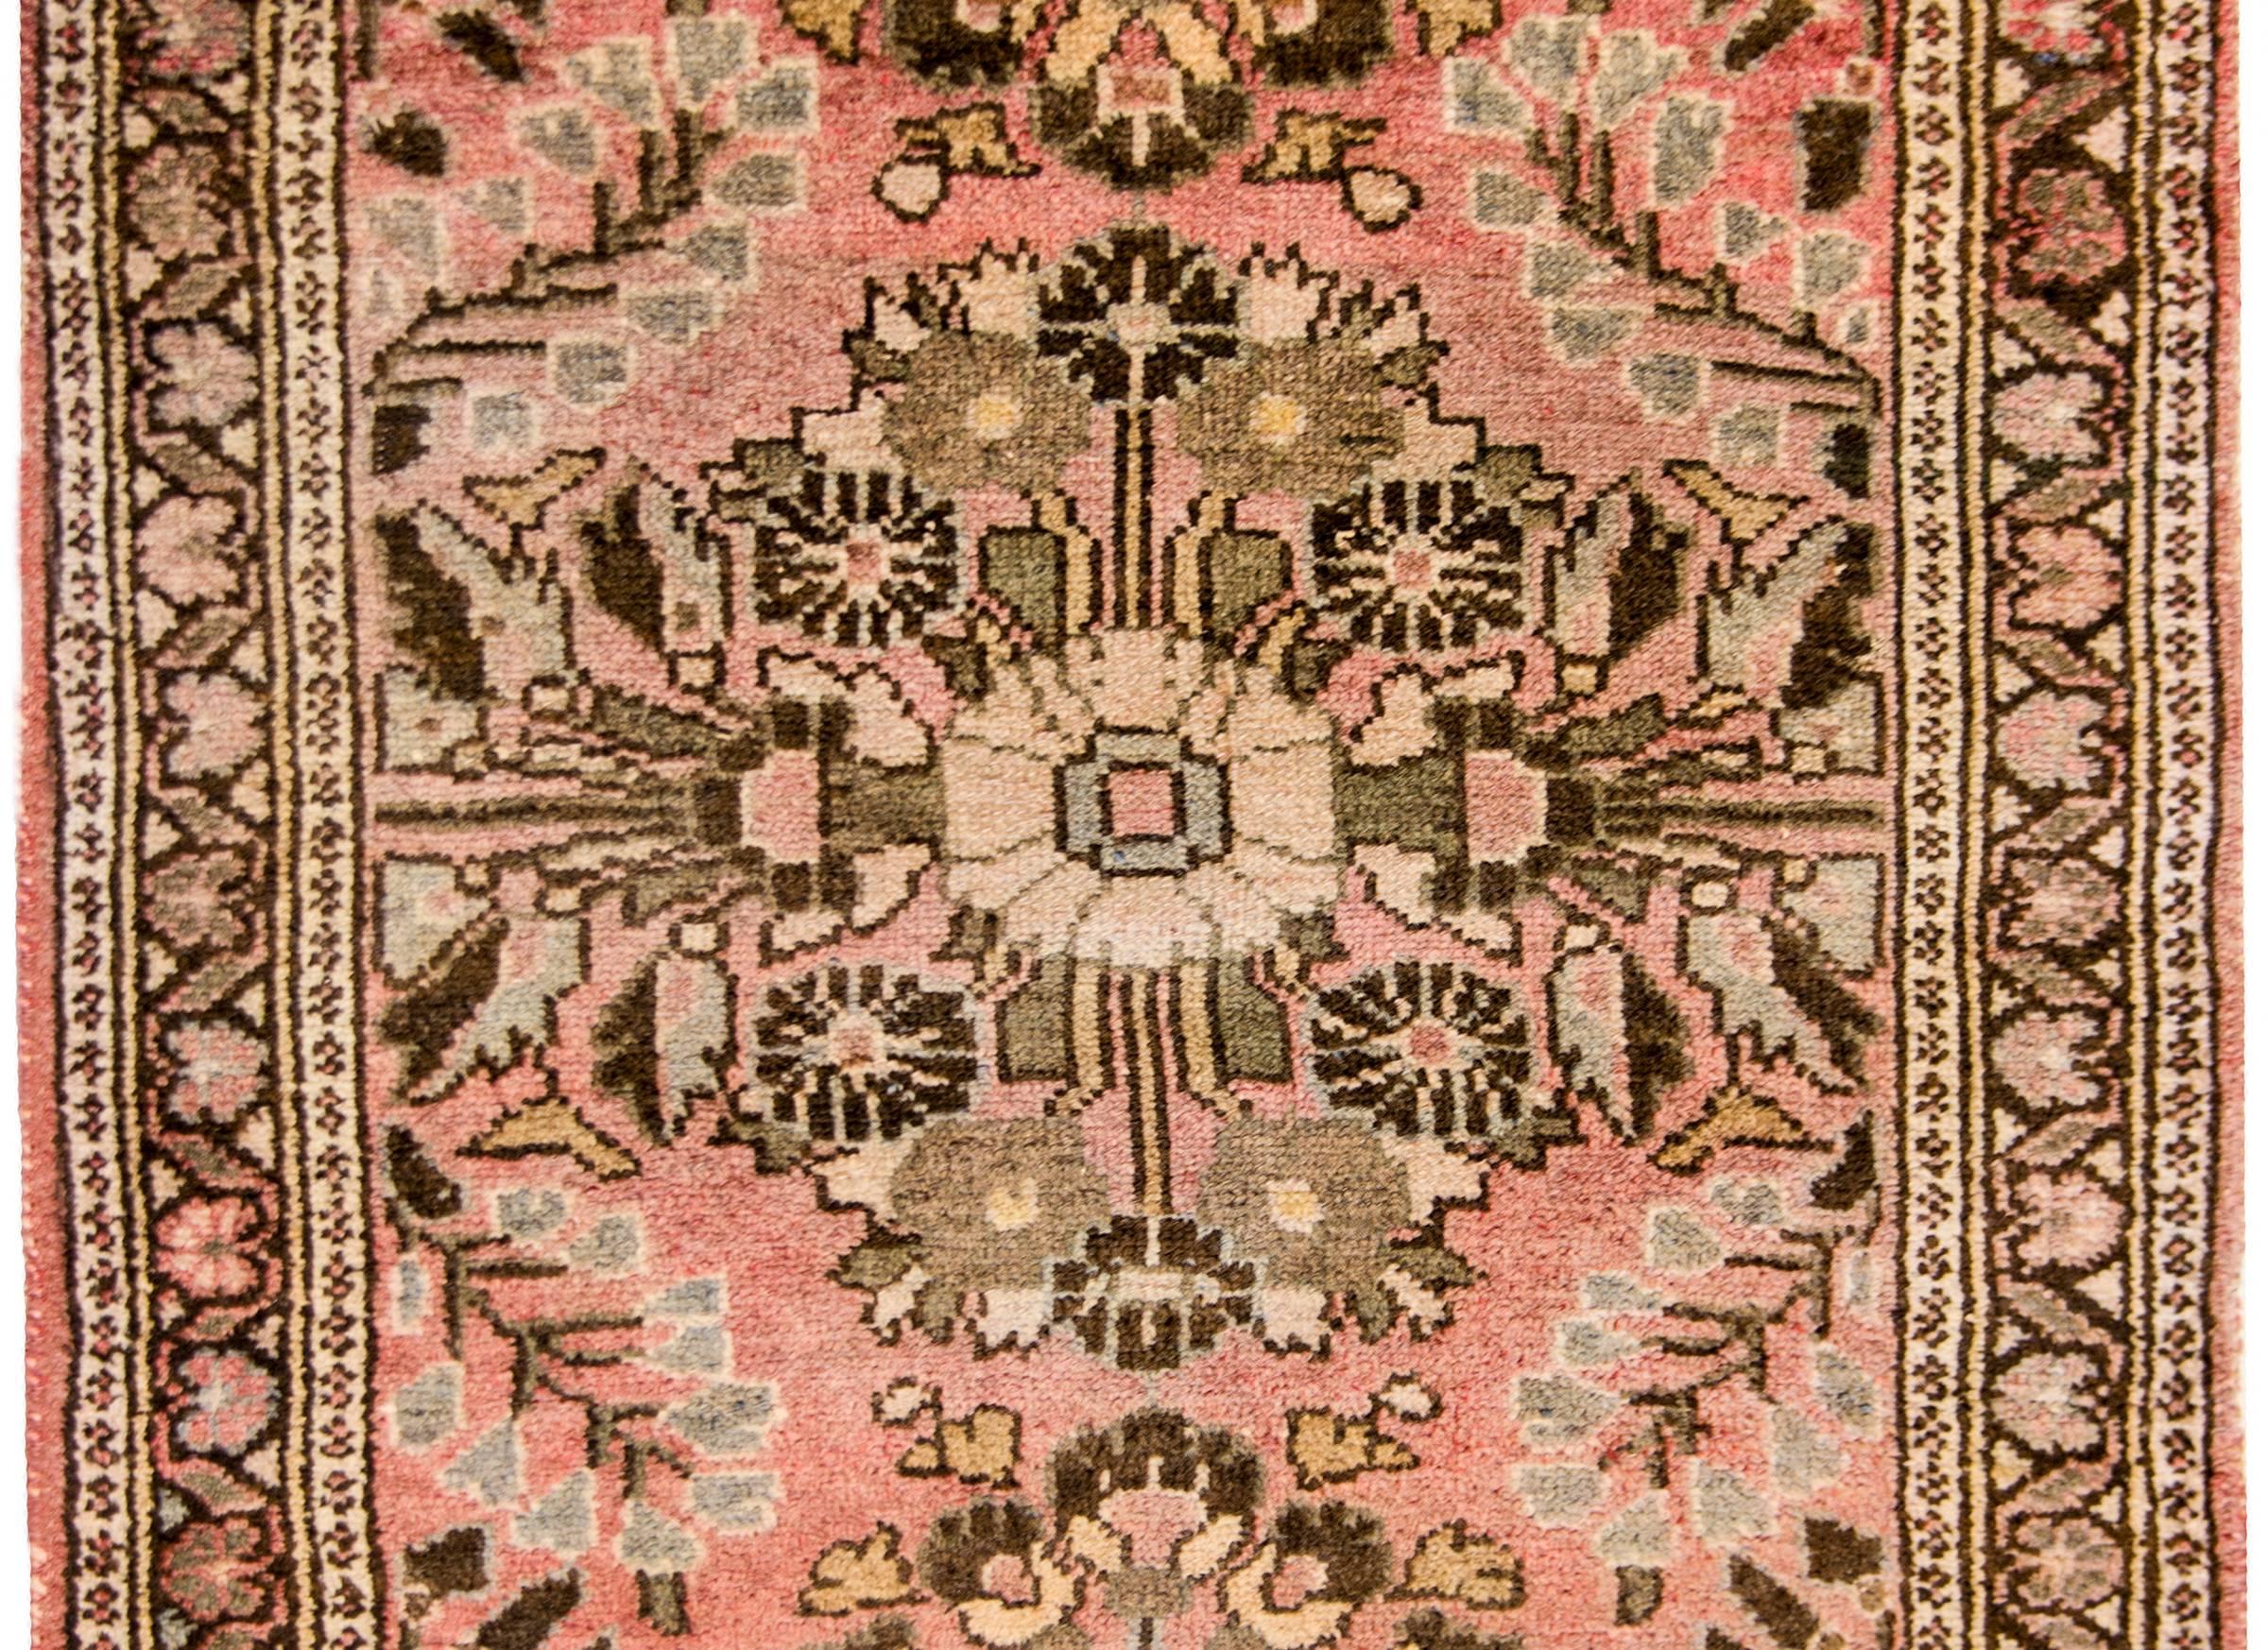 A petite early 20th century Persian Lilihan rug which has been sun faded with sweet all-over mirrored floral pattern woven in dark and light brown, cream, and coral colored wool. The border is complementary with a petite floral and leaf pattern